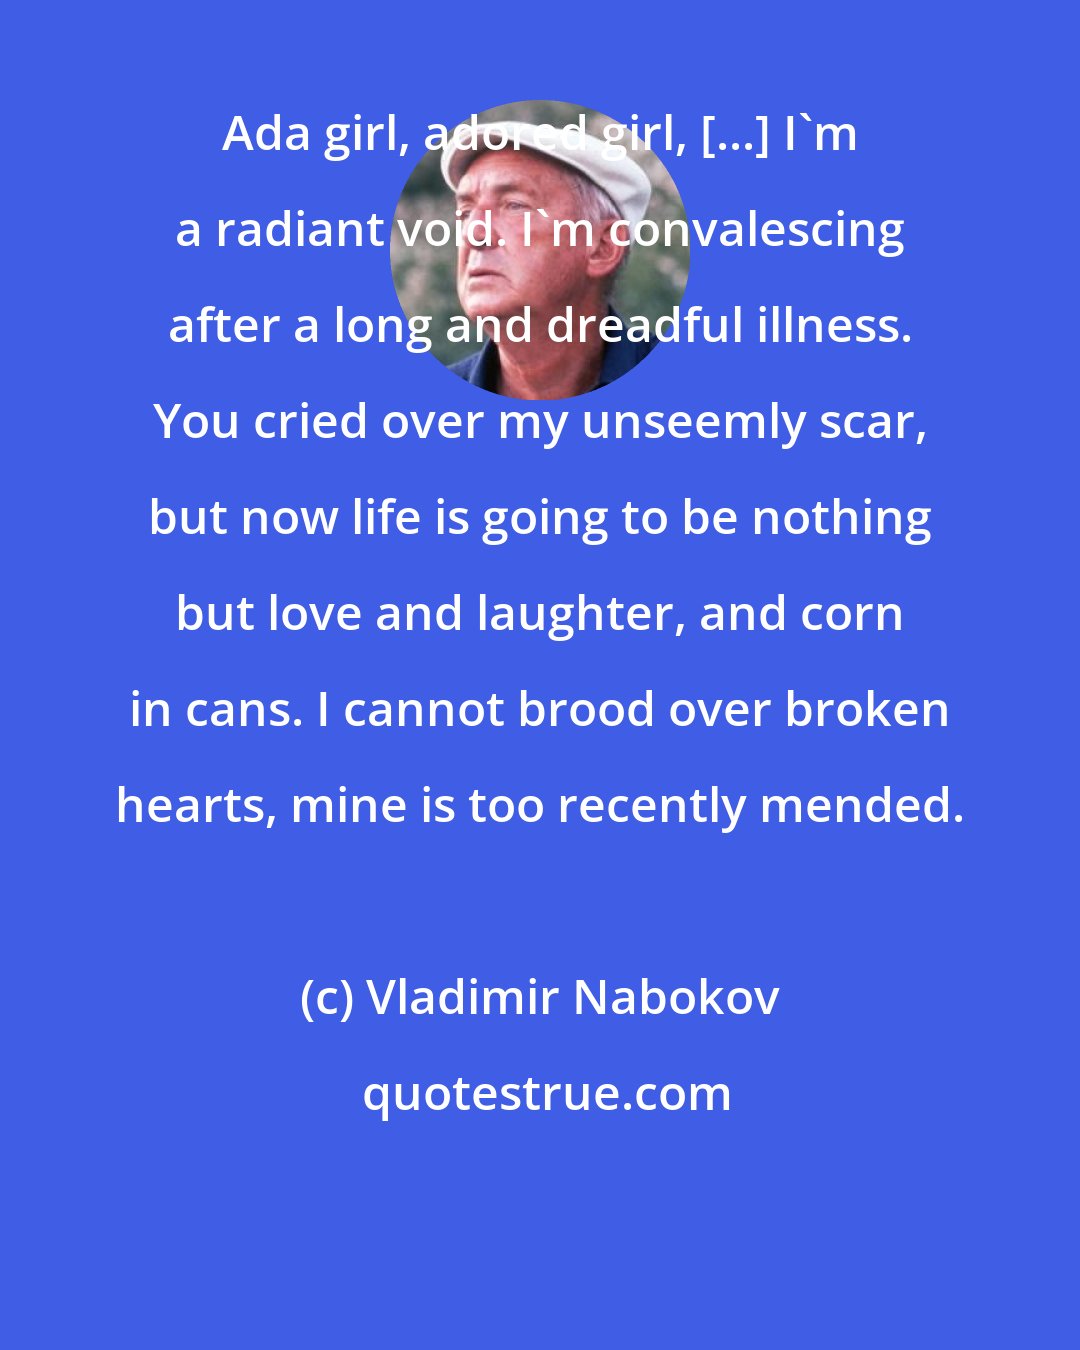 Vladimir Nabokov: Ada girl, adored girl, [...] I'm a radiant void. I'm convalescing after a long and dreadful illness. You cried over my unseemly scar, but now life is going to be nothing but love and laughter, and corn in cans. I cannot brood over broken hearts, mine is too recently mended.